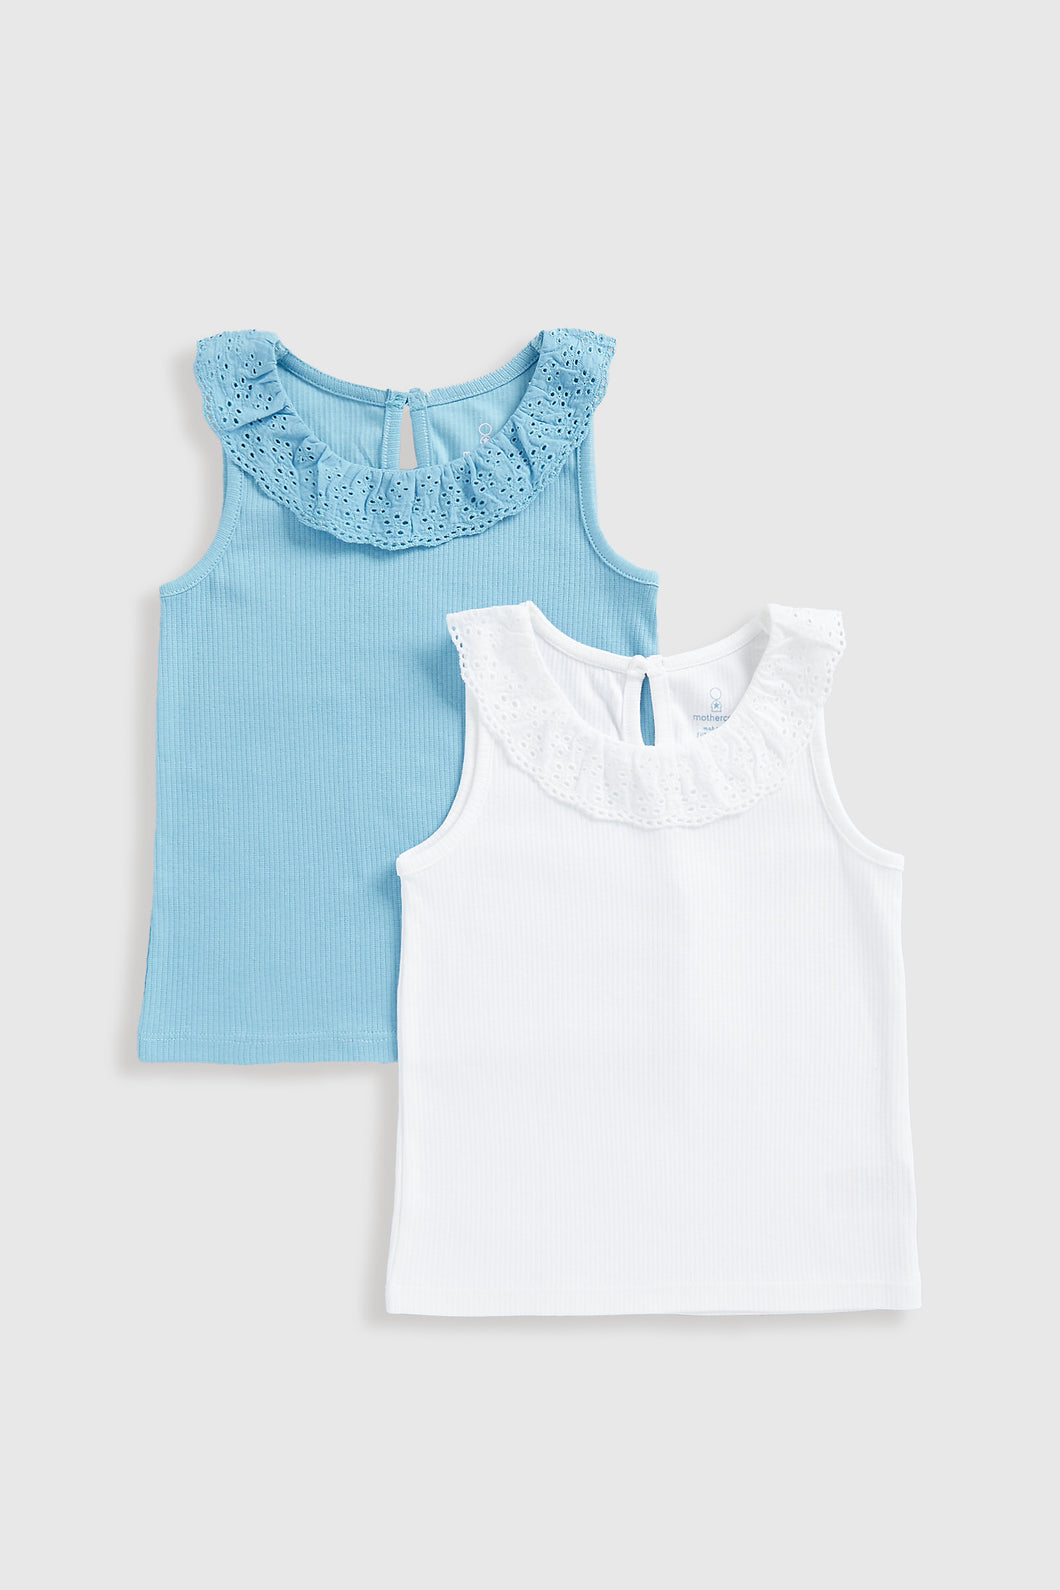 Mothercare Sleeveless T-Shirts - 2 Pack